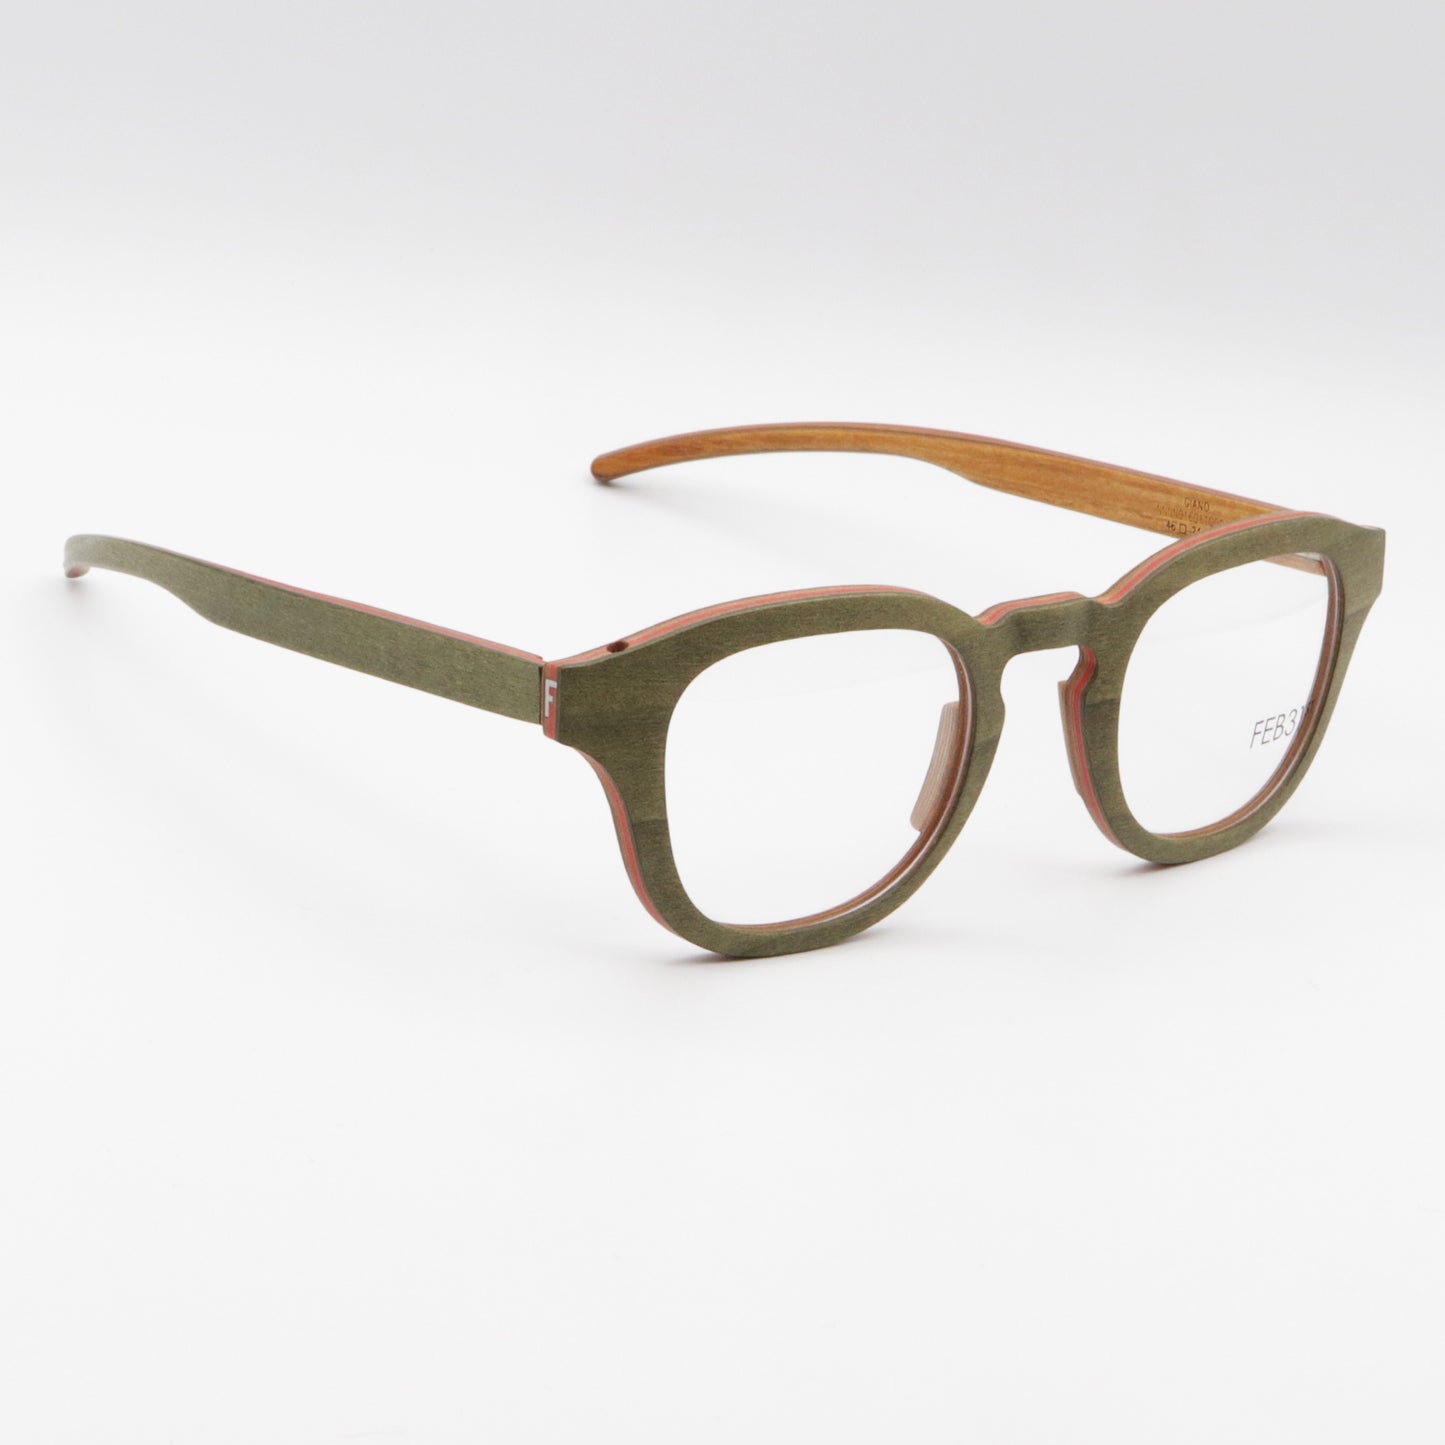 Giano by FEB31st wooden glasses Green and Red